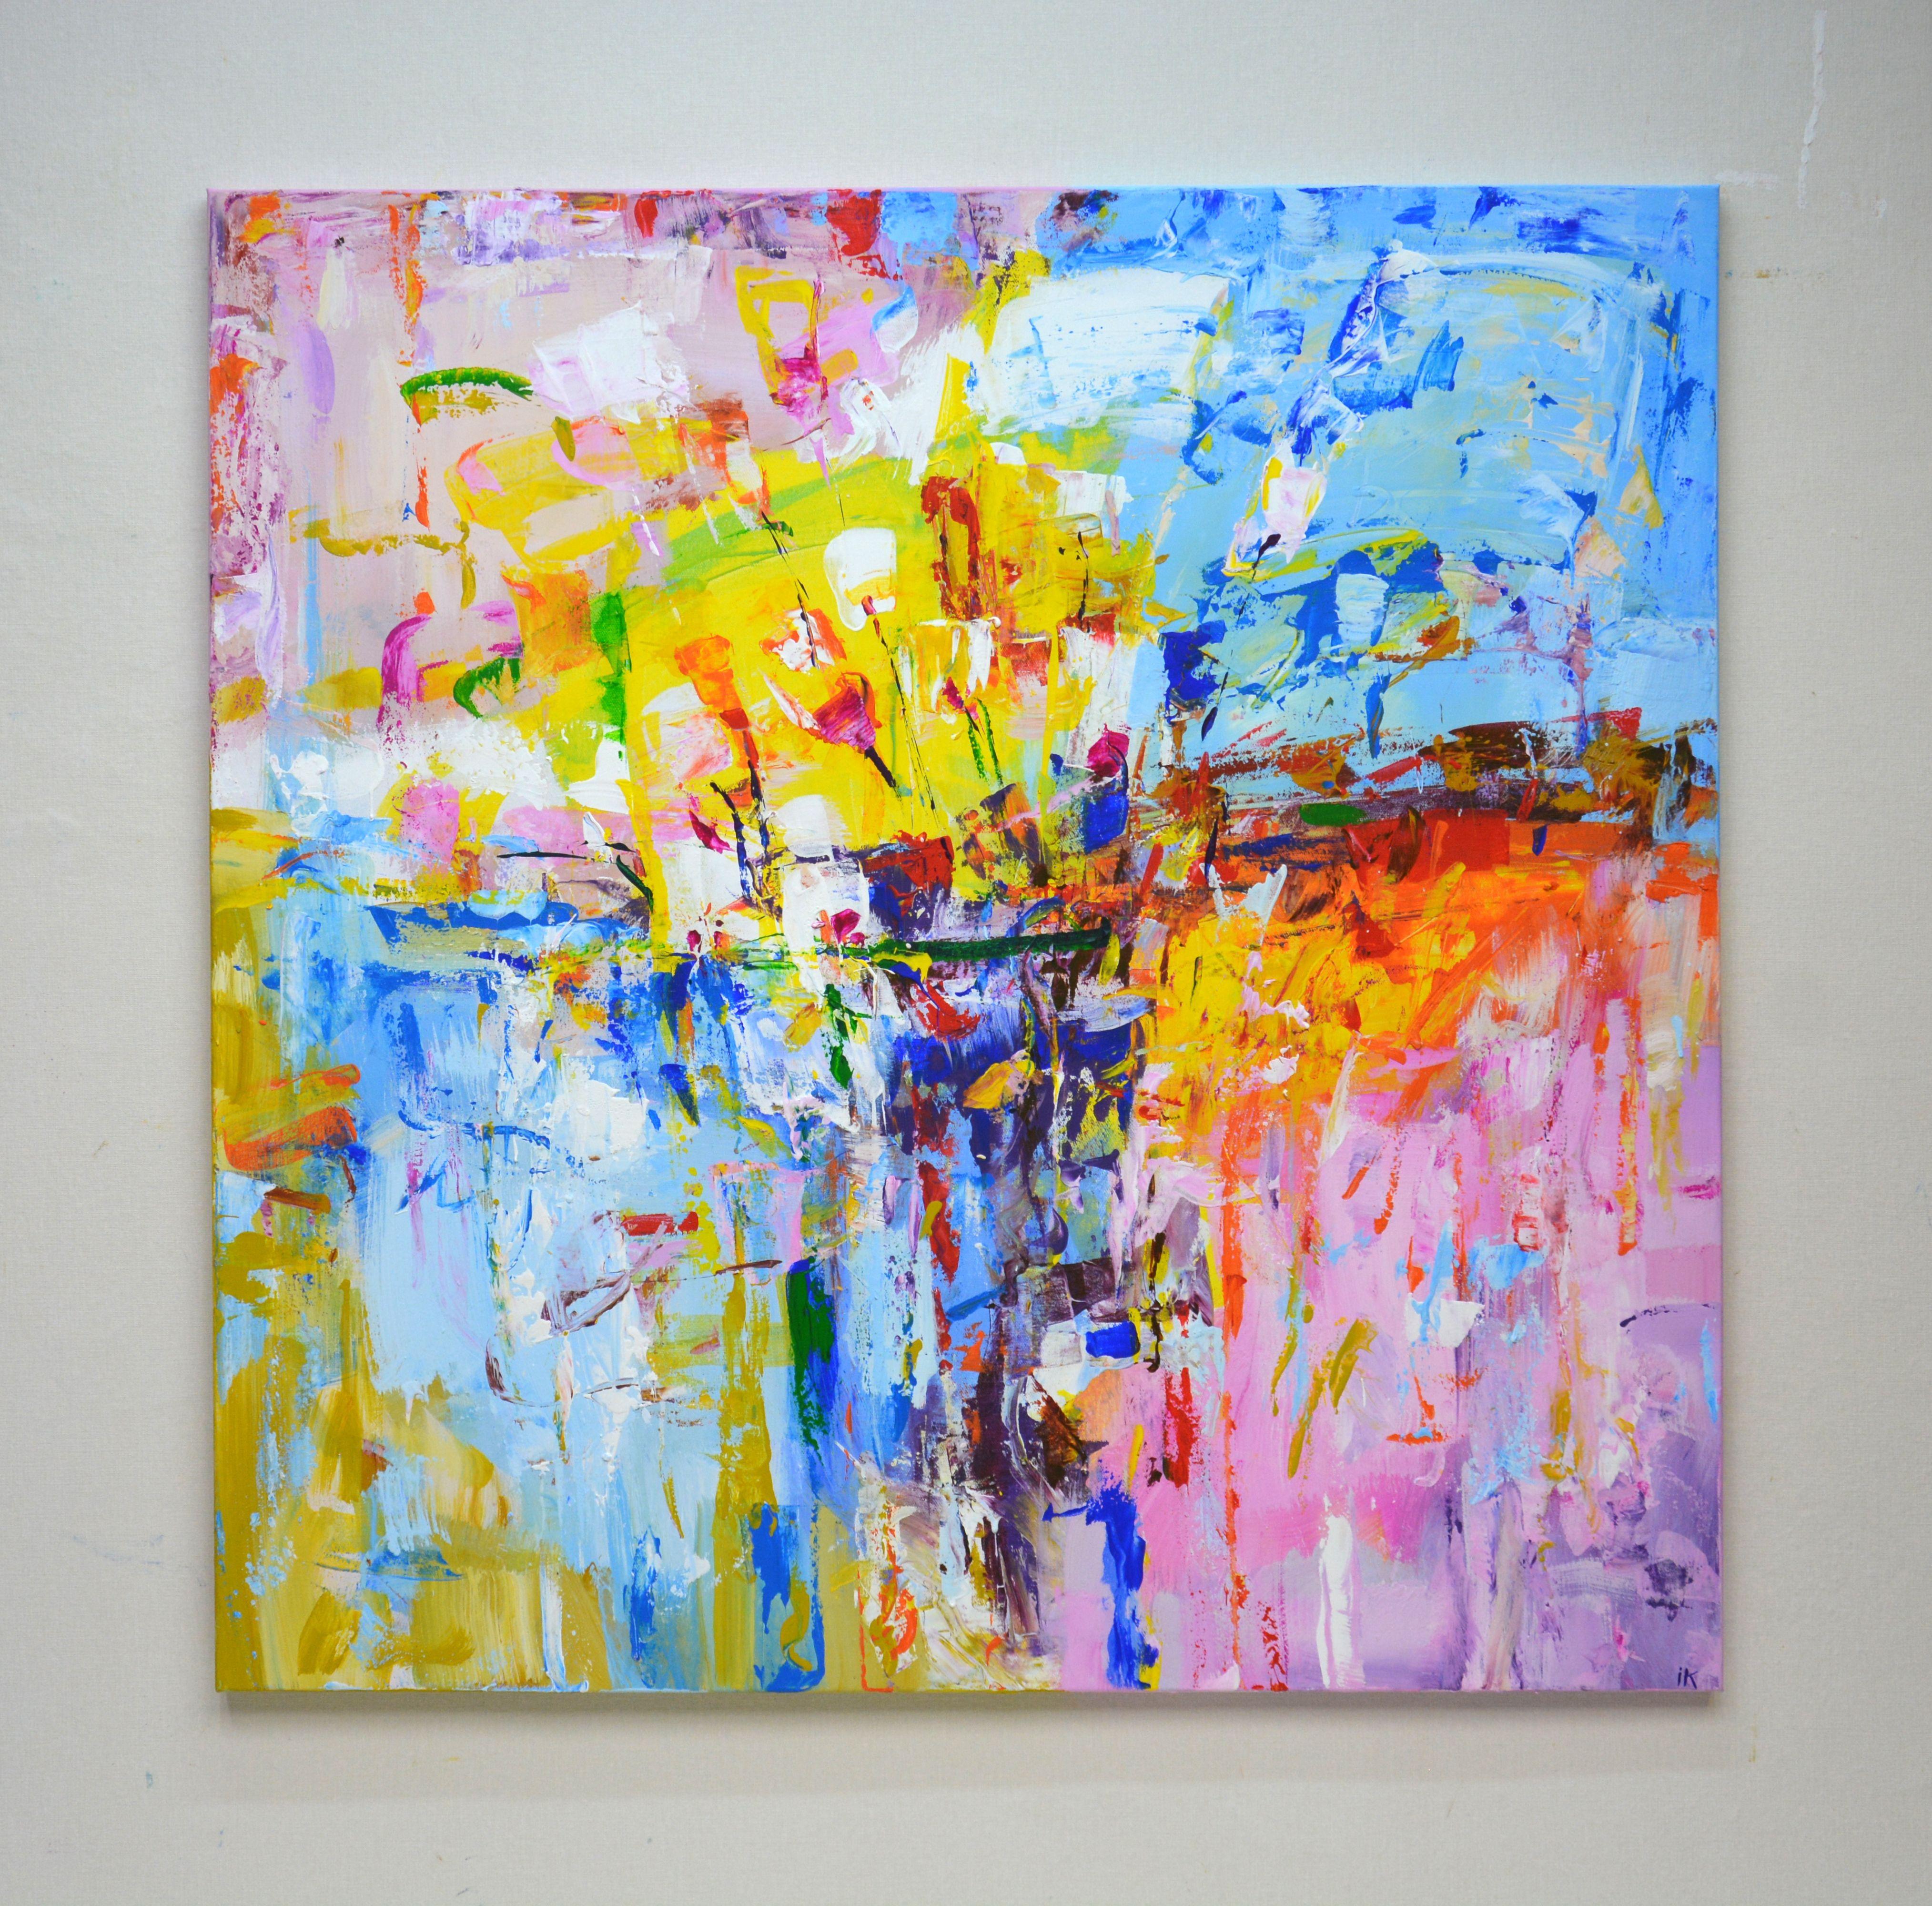 Colors of a new day. This unique, abstract, acrylic painting will accentuate your interior. The product has a mature modern aesthetic design and is filled with positive energy. Colors overlap and overlap, and also ascertain with subtle and vivid